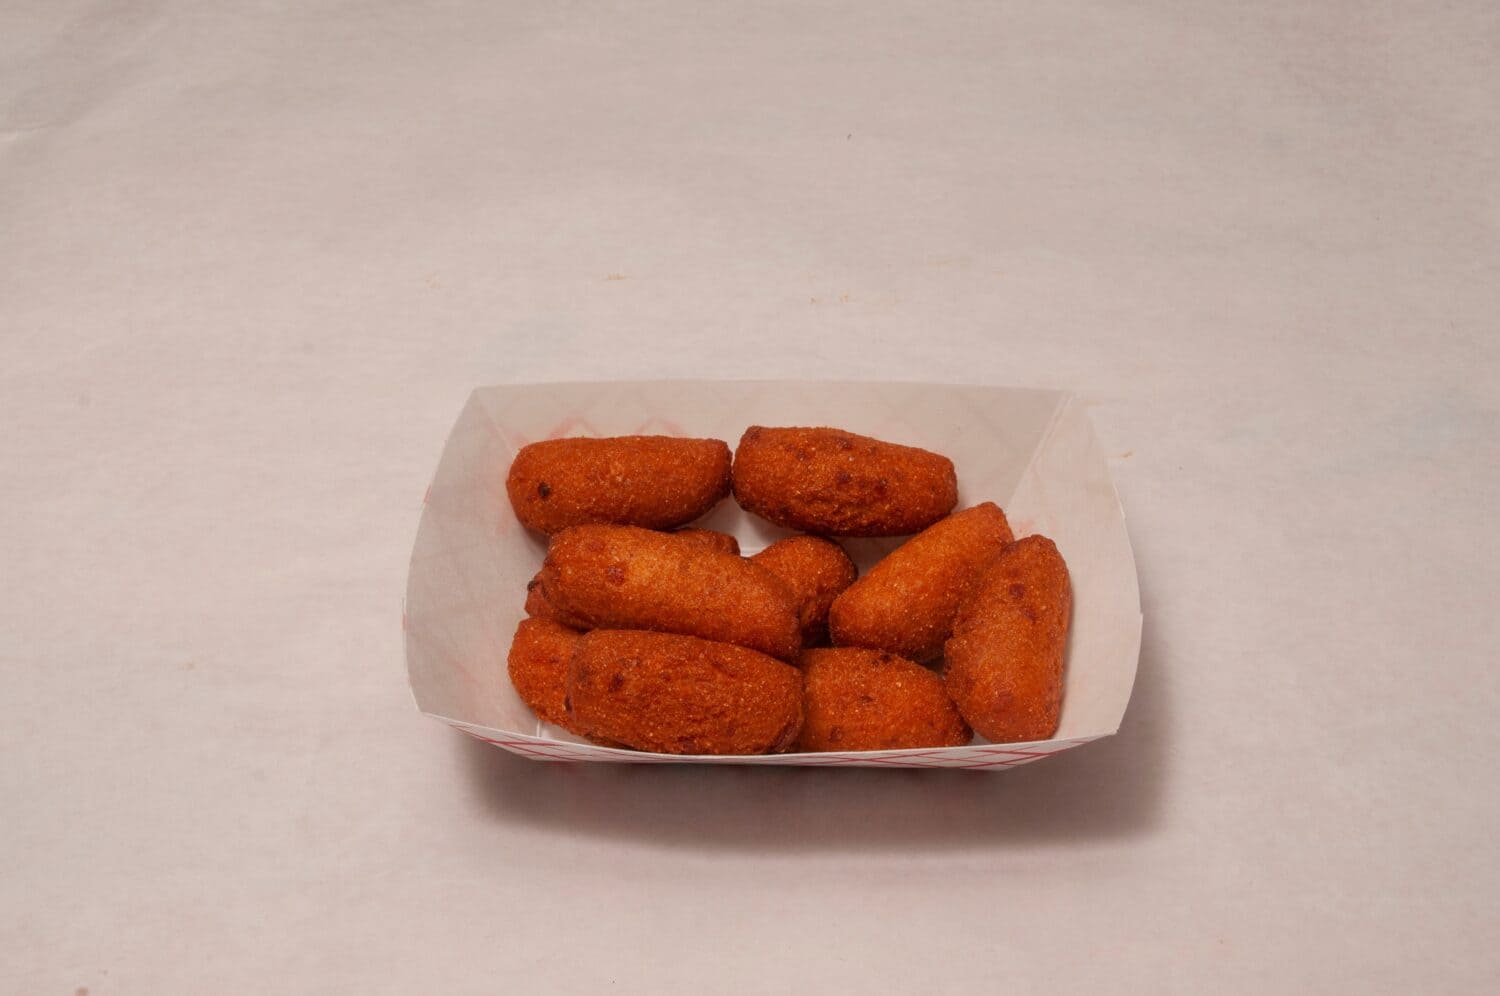 Delicious southern American cuisine known as hushpuppies